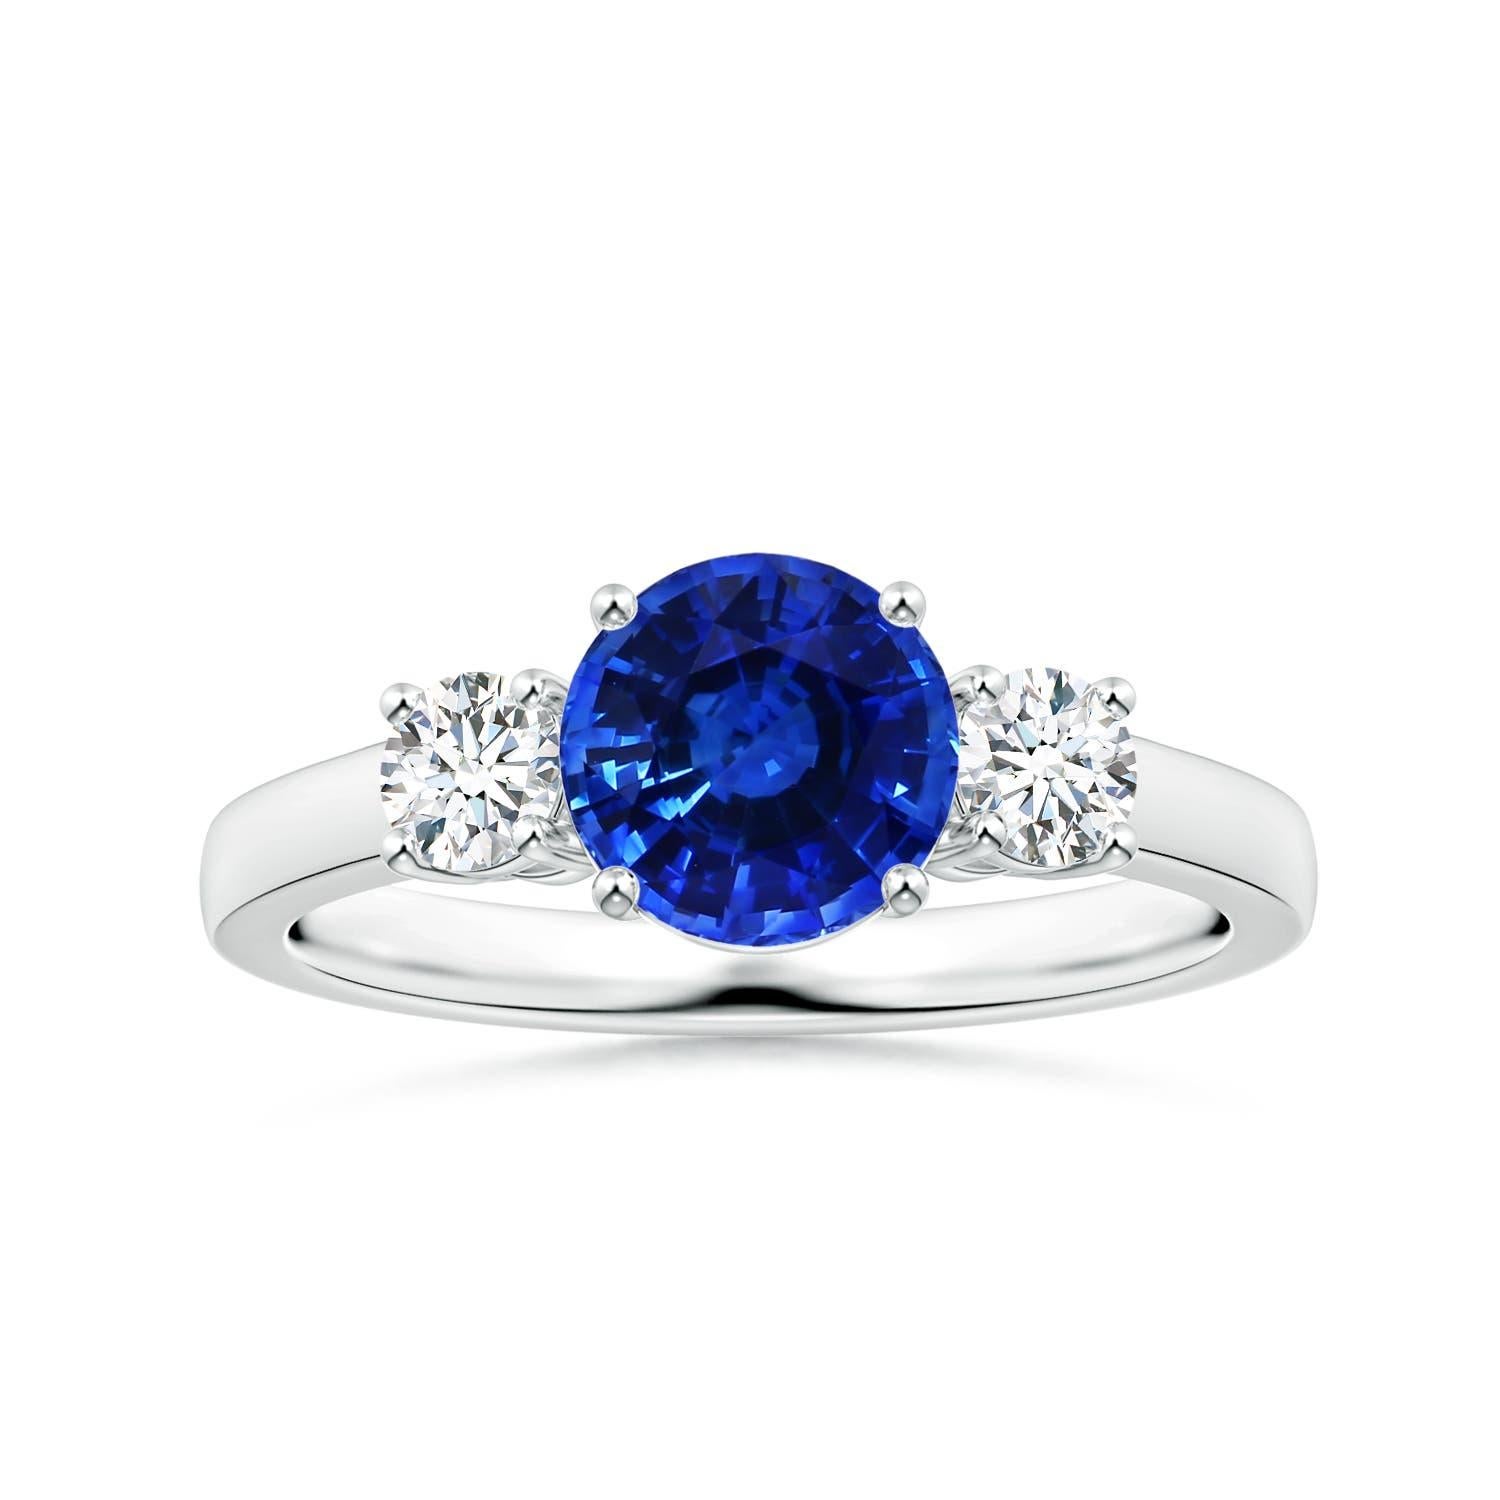 For Sale:  ANGARA Three Stone GIA Certified Blue Sapphire Ring in White Gold with Diamonds